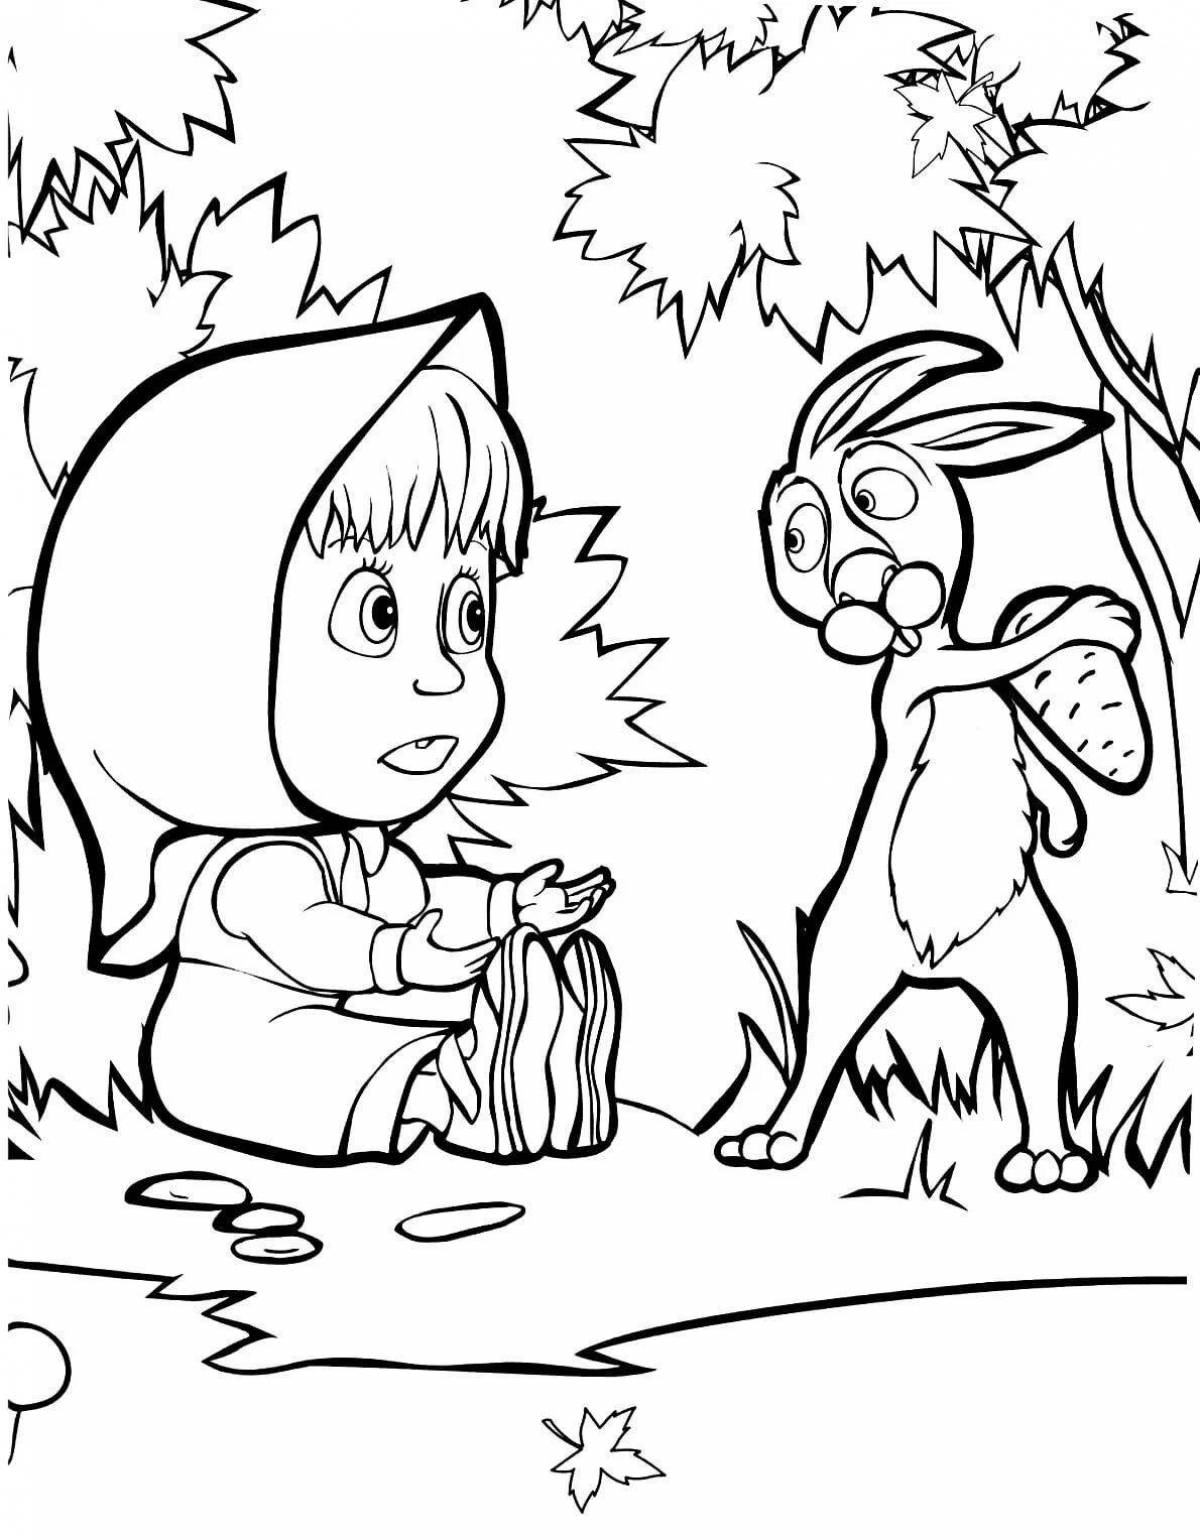 Coloring page friendly bear from masha and bear